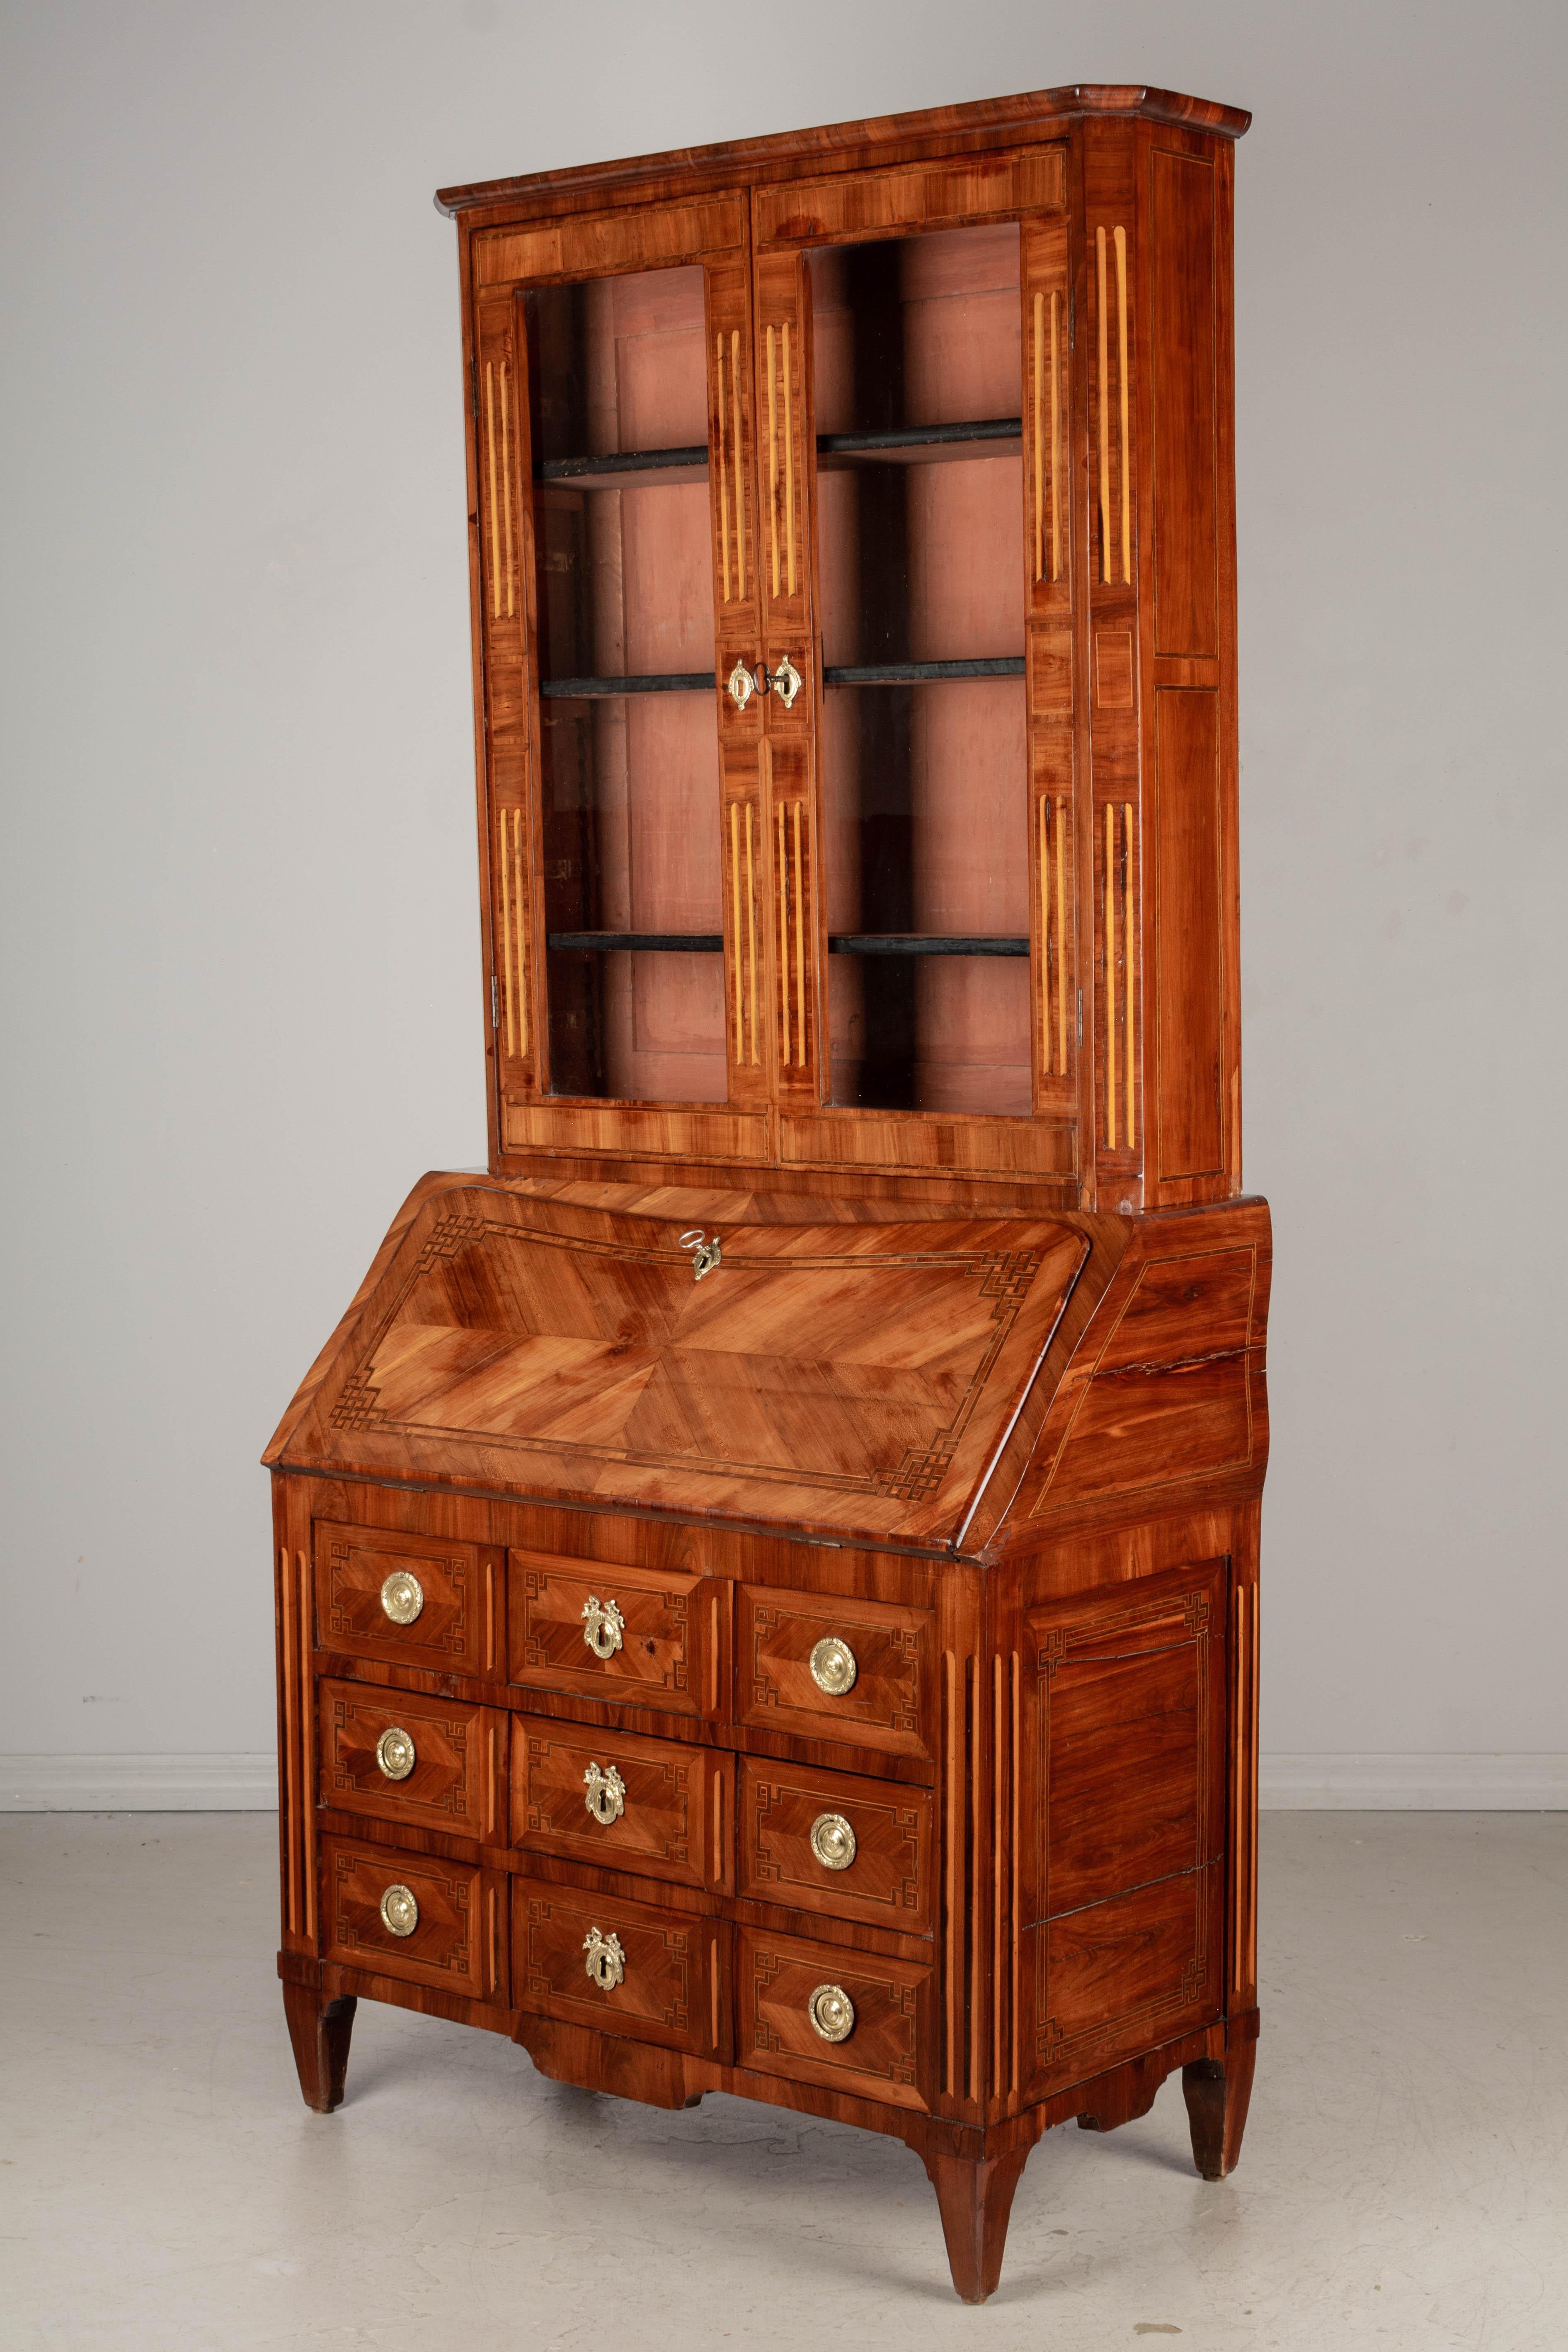 18th Century French Louis XVI Marquetry Secretaire or Desk In Good Condition For Sale In Winter Park, FL